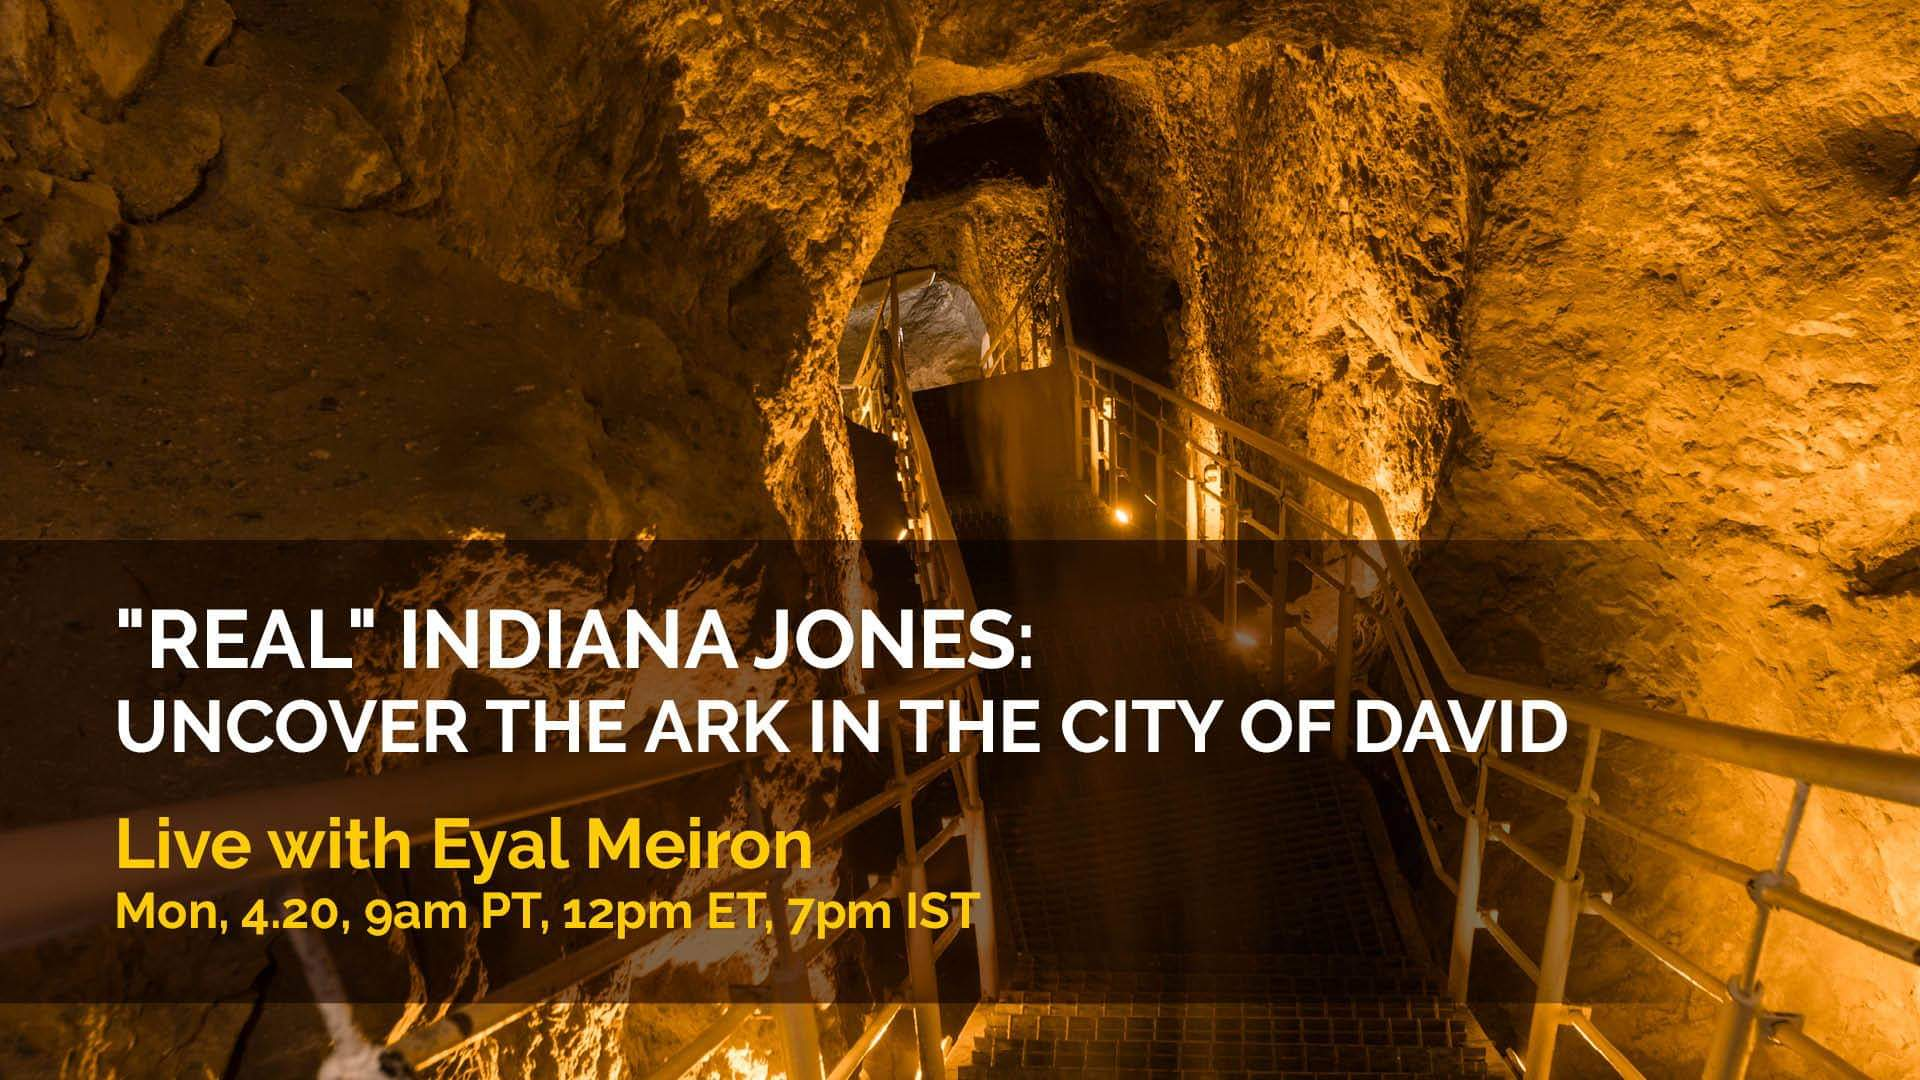 Real Indiana Jones: Uncover the Ark in the City of David